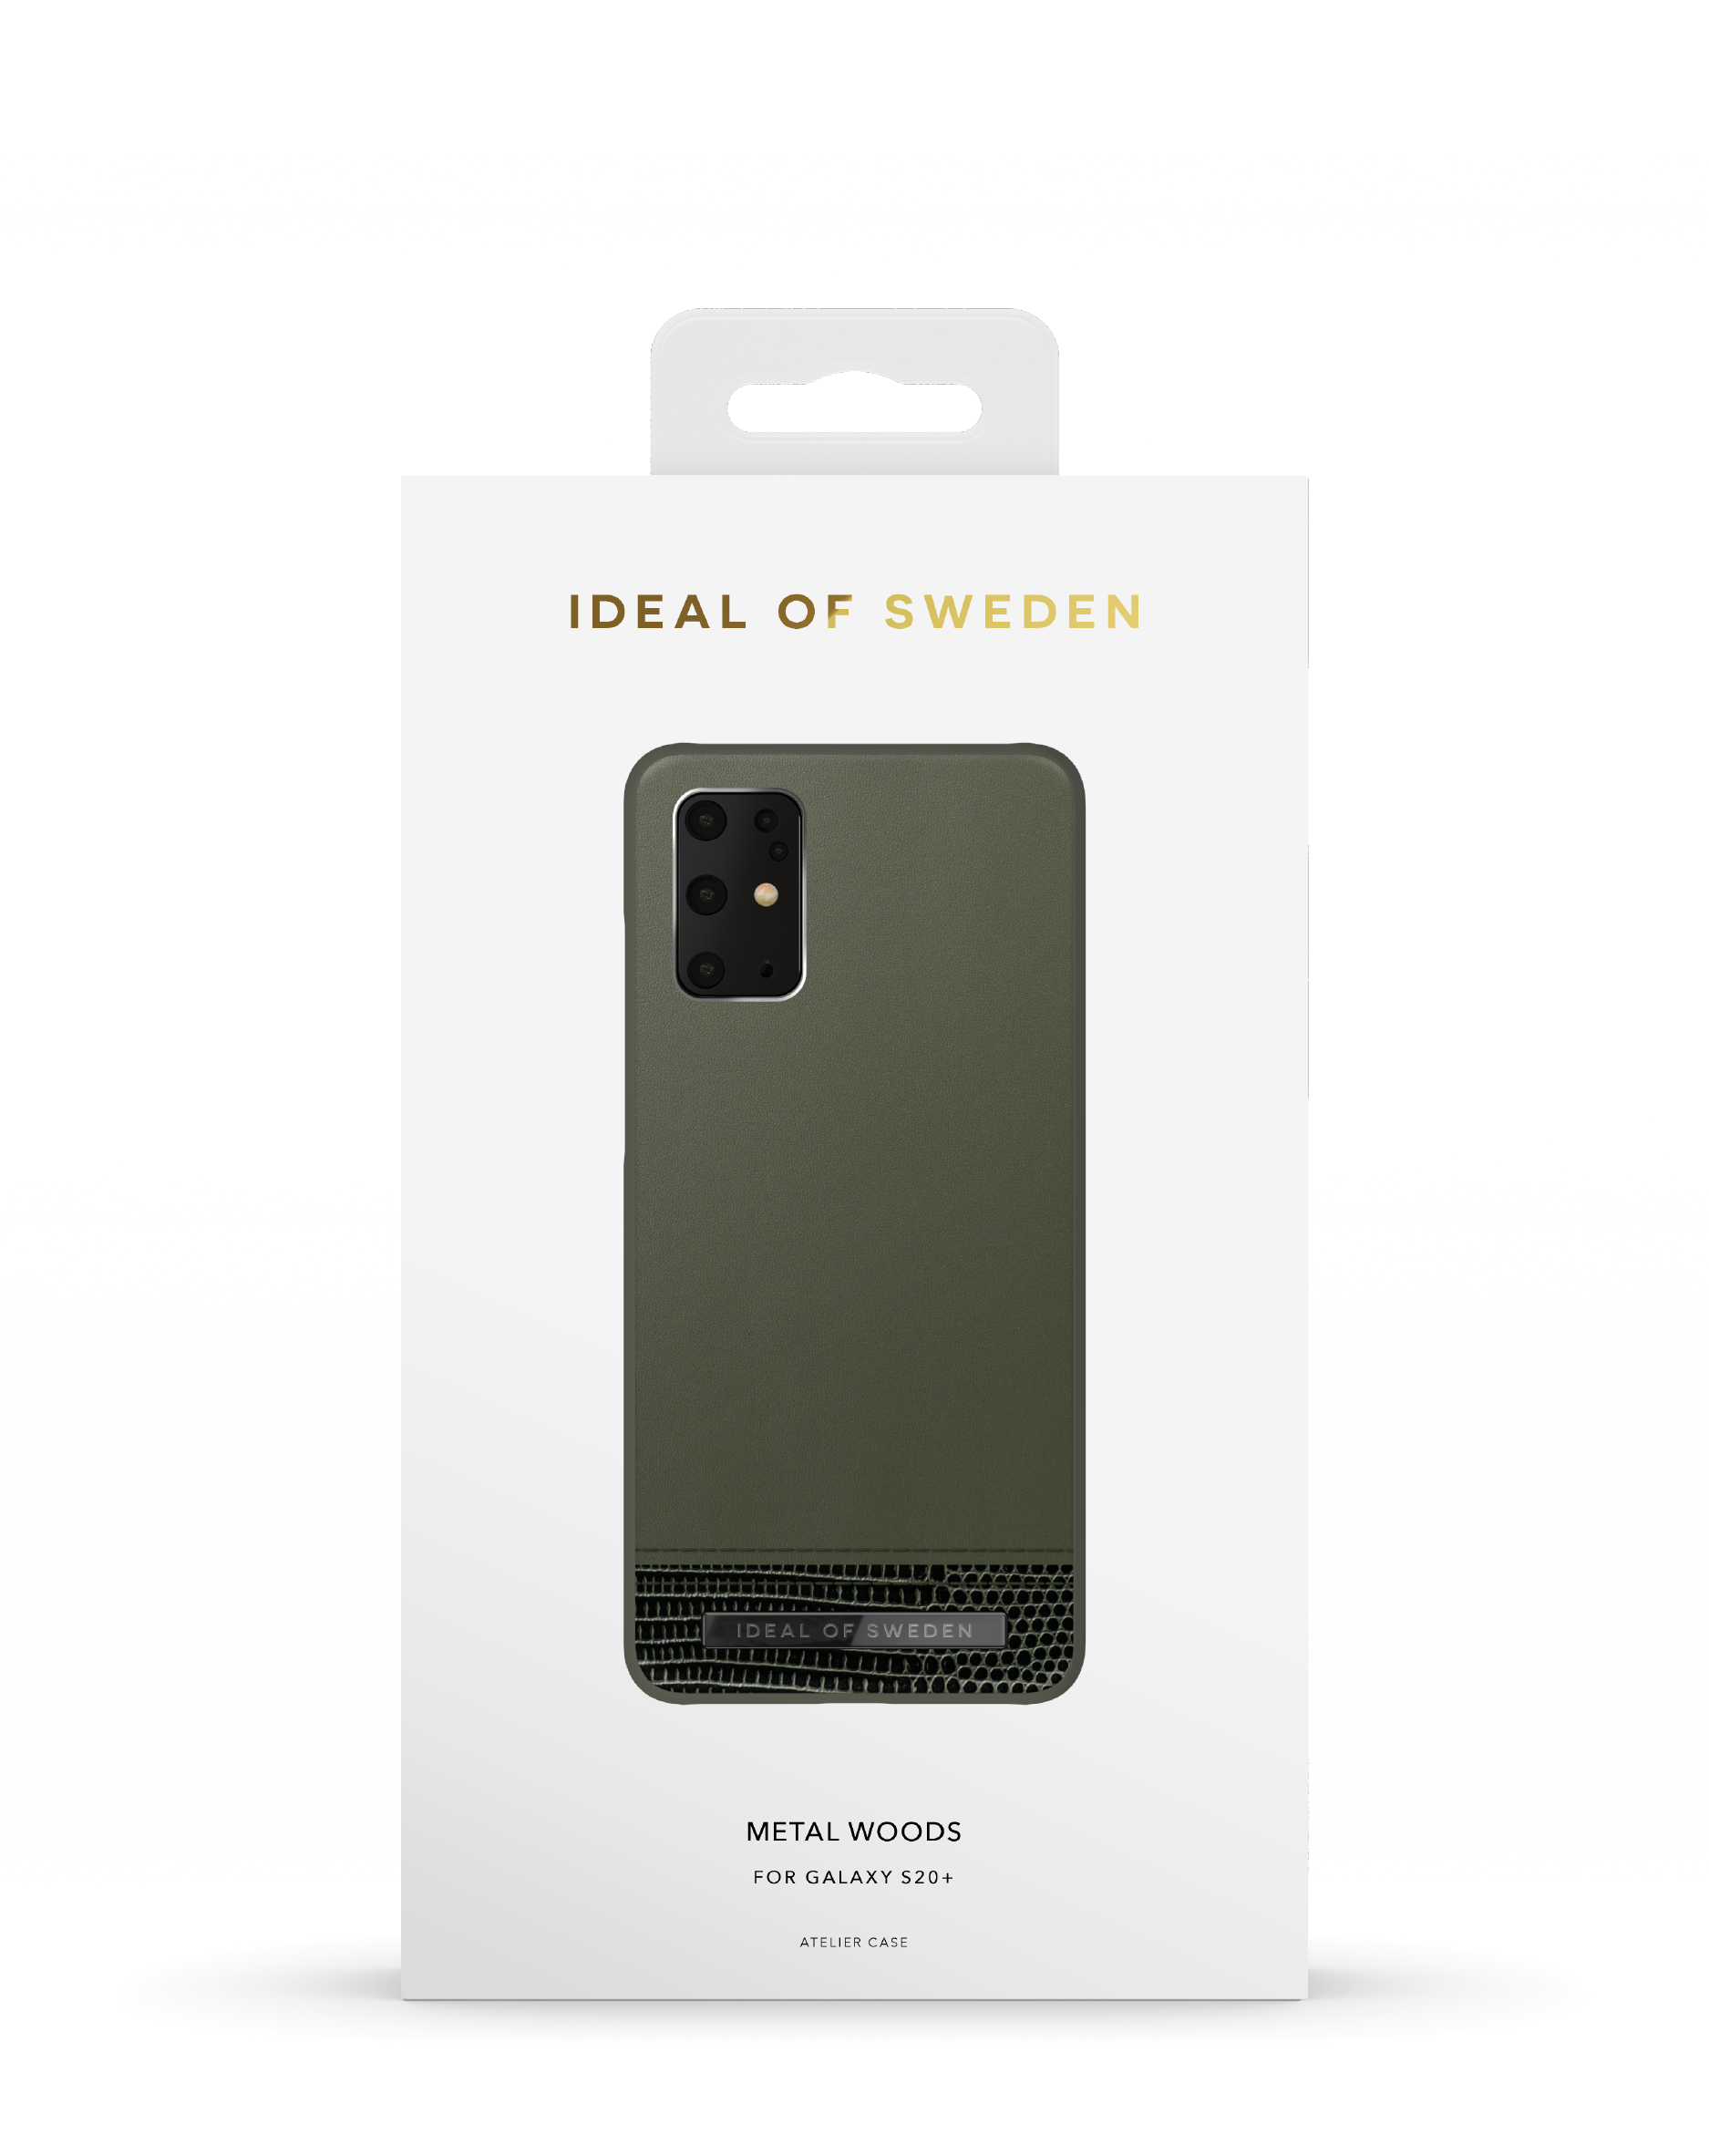 SWEDEN IDEAL IDACAW20-S11P-235, Woods S20 Ultra, Backcover, Metal OF Galaxy Samsung,